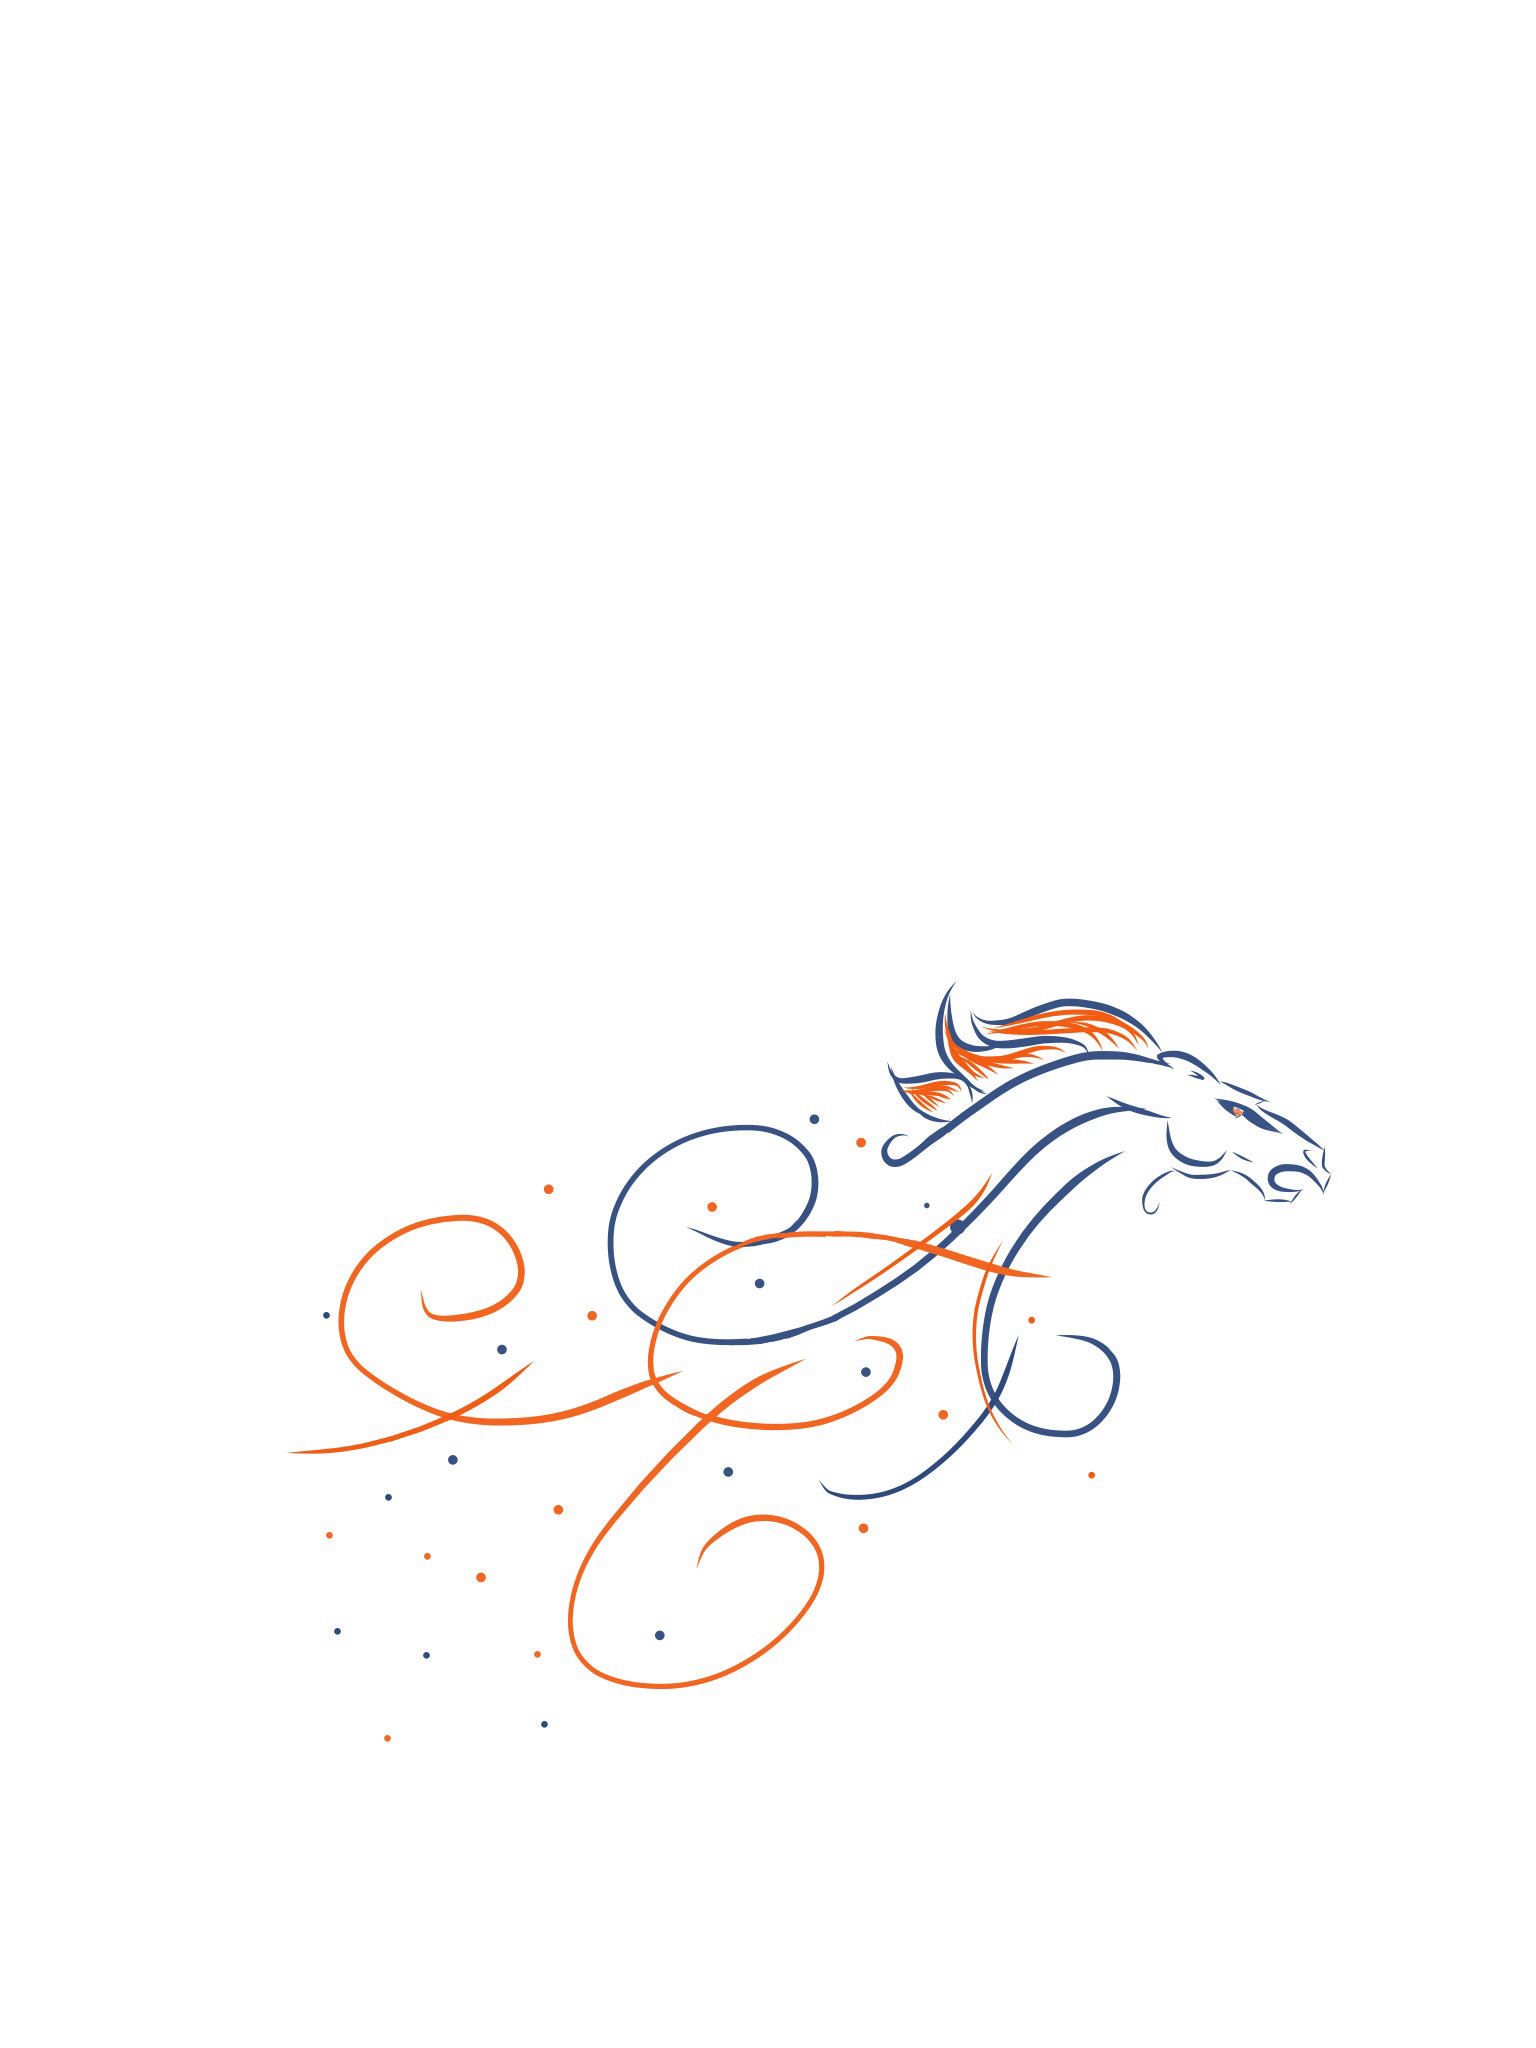 1536x2048 Feminine Denver Broncos design. This could easily be converted to another  team also.